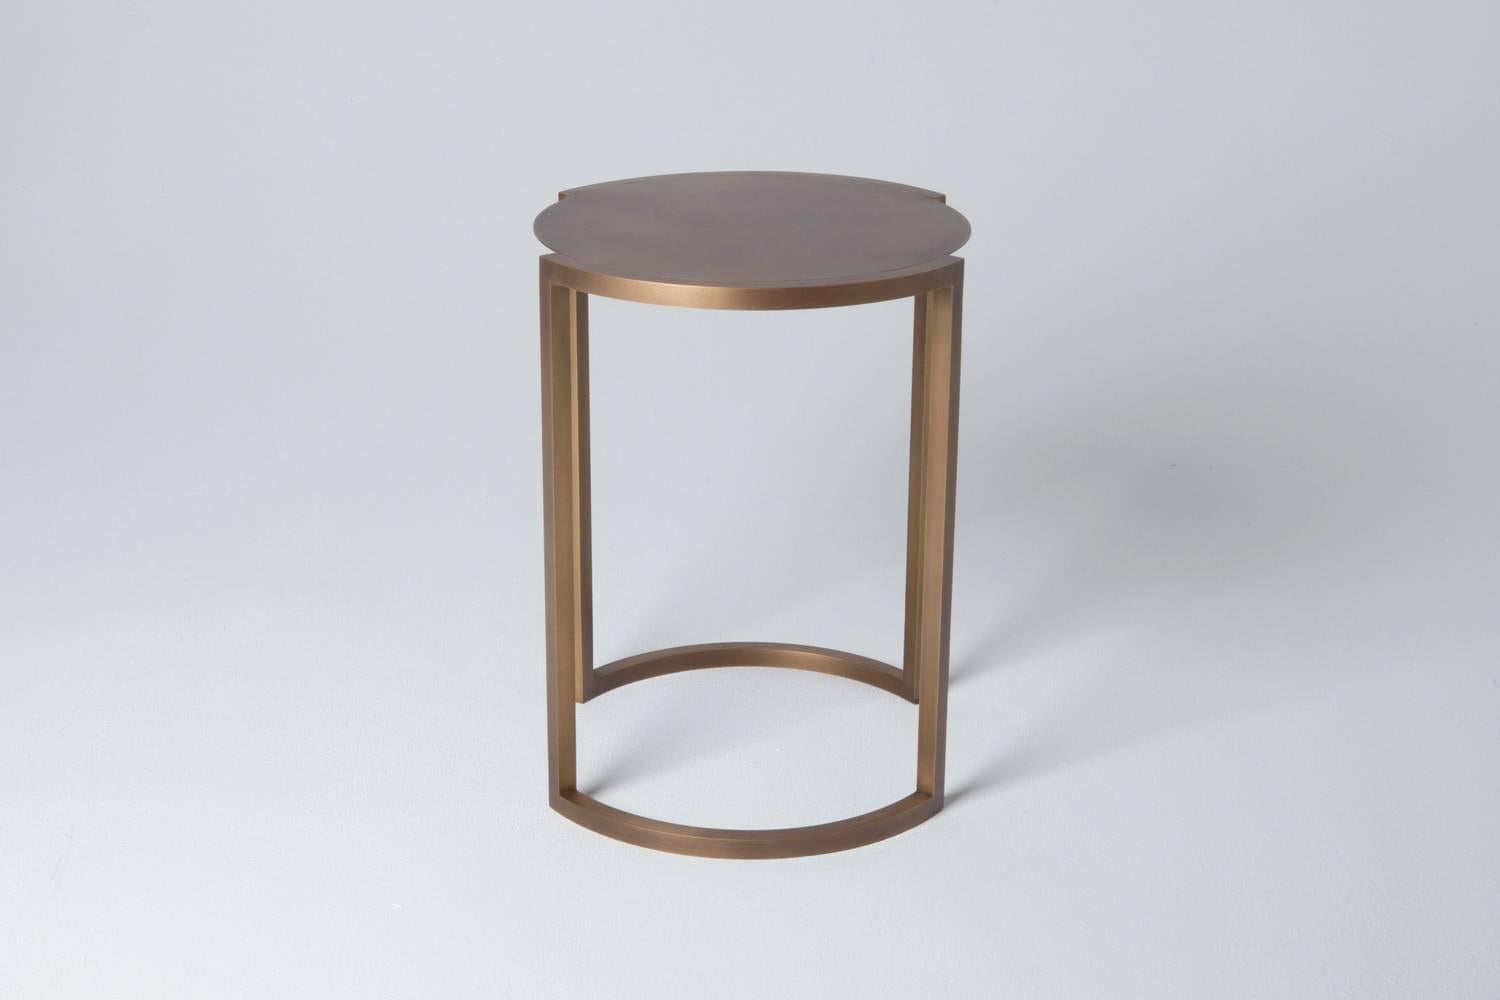 Solid arched brass legs outline the delicate aged brass top of the Covet end table, creating a balance of precision and elegance.

Also, available in Black Steel. Please inquire for additional information.

Designed and hand crafted  by Soraya